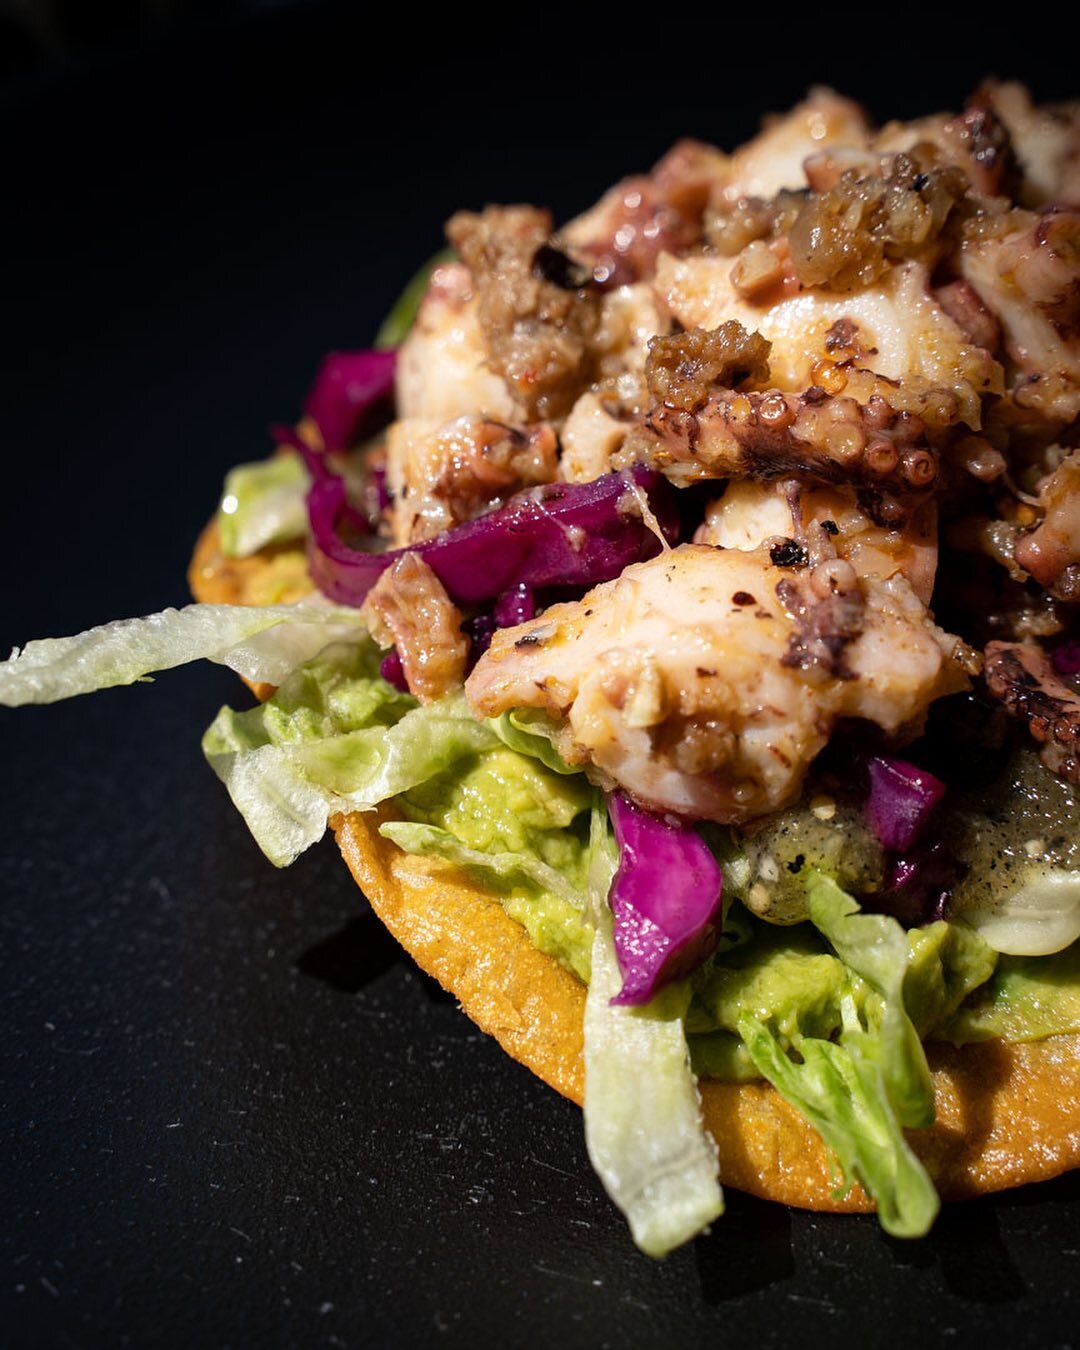 This summer&rsquo;s fan favourite - our Octopus and Chorizo tostada ☀️ ⁣
⁣
Come see us these next few weeks to enjoy our summer menu! ⁣
⁣
𝘖𝘱𝘦𝘯 𝘦𝘷𝘦𝘳𝘺𝘥𝘢𝘺 𝘧𝘳𝘰𝘮 𝟷𝟸-𝟿